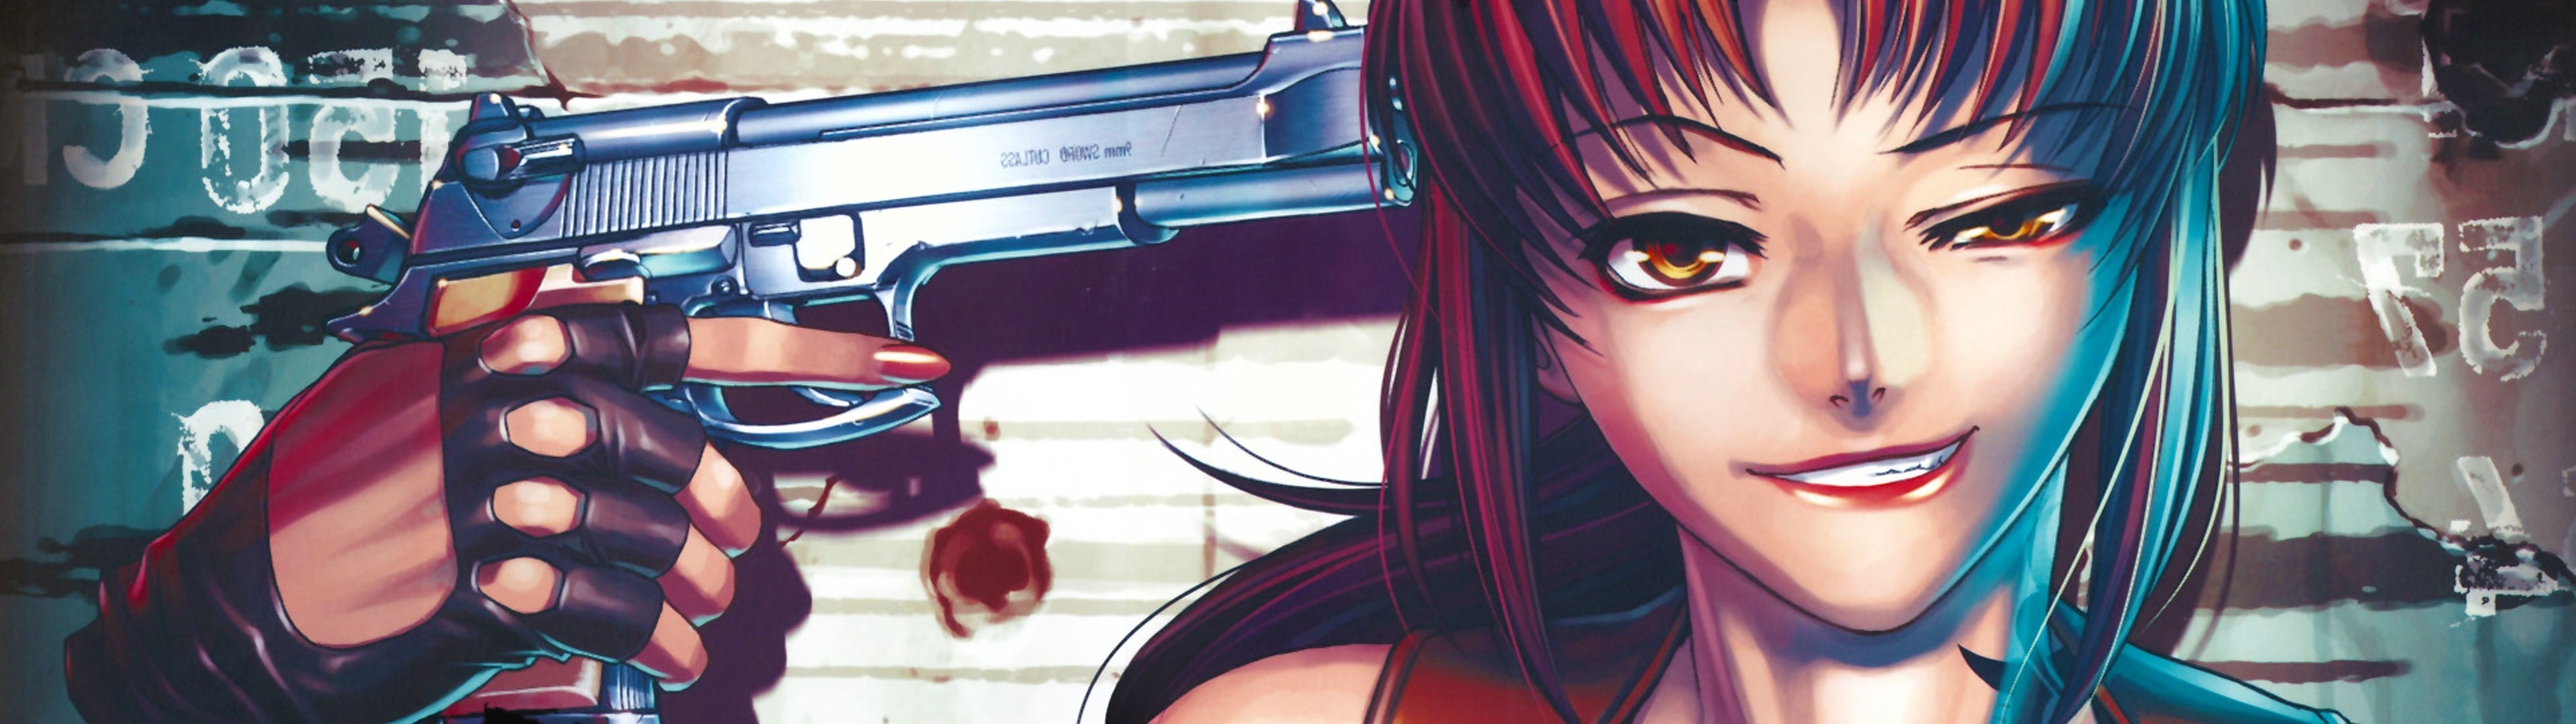 Revy, Black Lagoon Wallpapers Hd / Desktop And Mobile Backgrounds